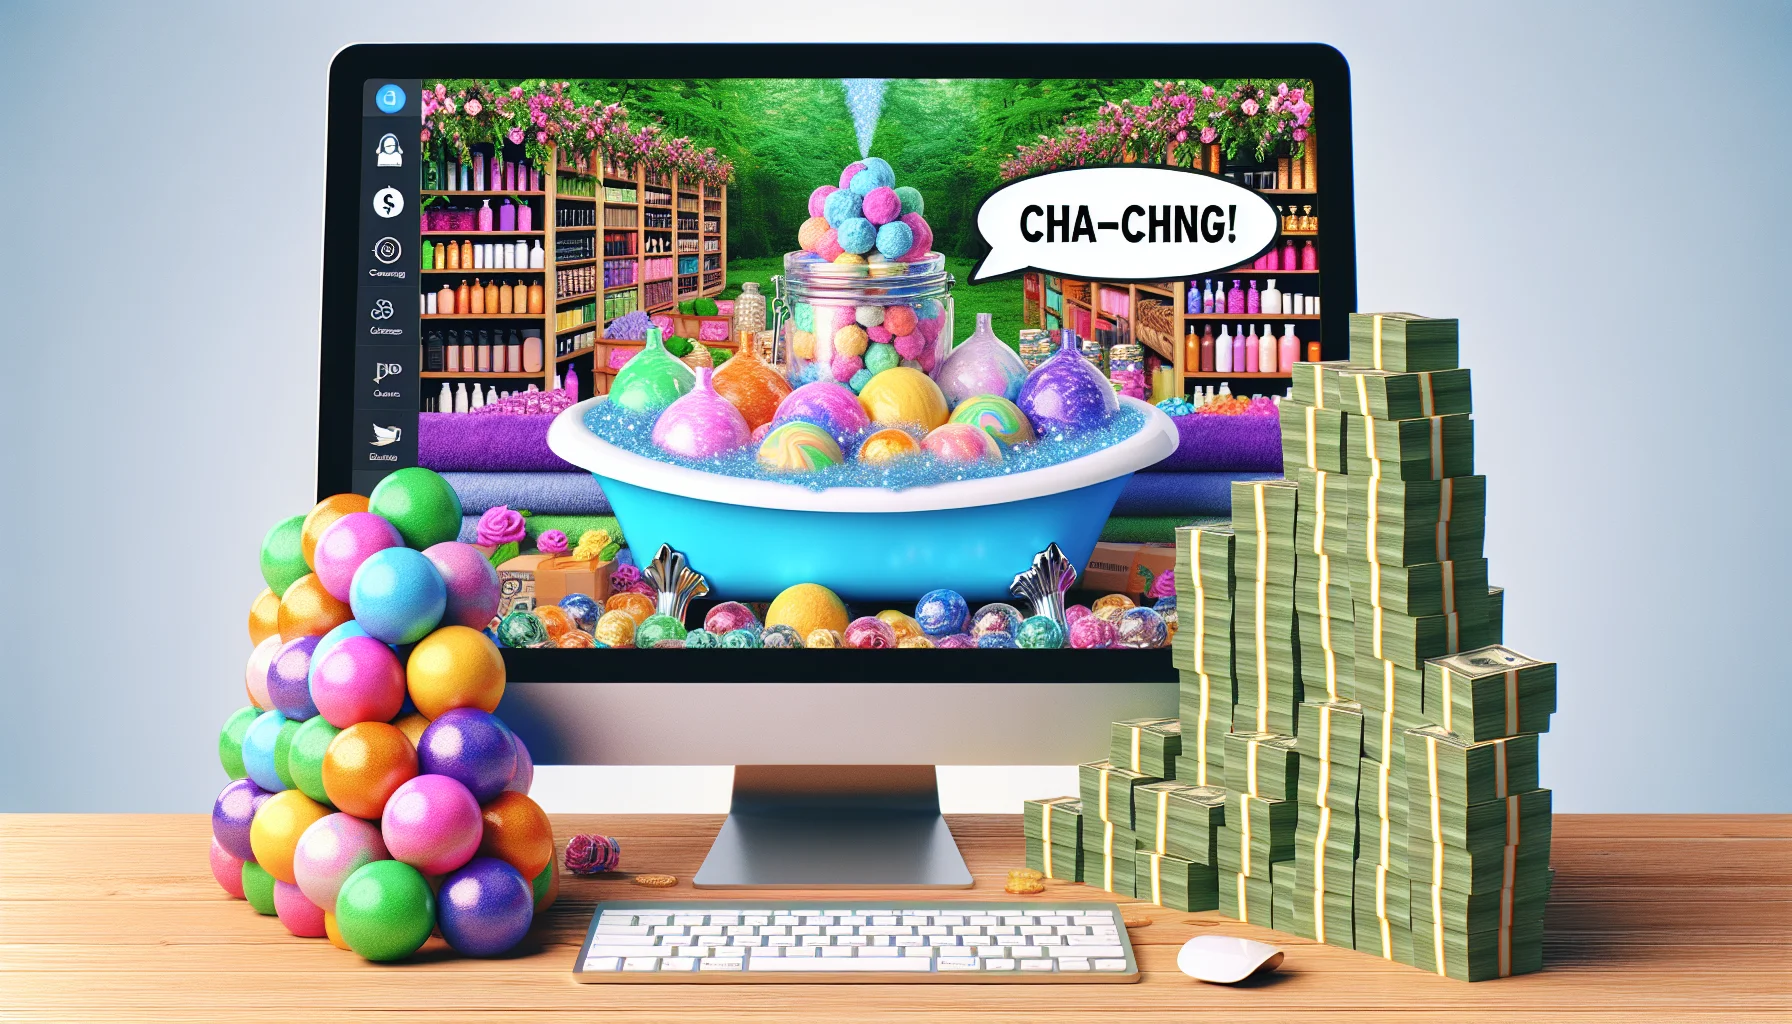 A humorous yet realistic scene related to the concept of making money online. In this image, we have a computer screen displaying a lush virtual marketplace filled with various bath and body products, from vibrant, aromatherapy bath bombs to shimmery lotions. Beside the computer, a stack of digital virtual cash is rising higher, indicating the earnings from the affiliate program. There's a bubble, subtitled with 'Cha-ching!', popping out from the computer screen to give a cheeky nod to the profitable endeavor. The ambiance is exciting yet laid-back, setting a perfect balance between work and relaxation.